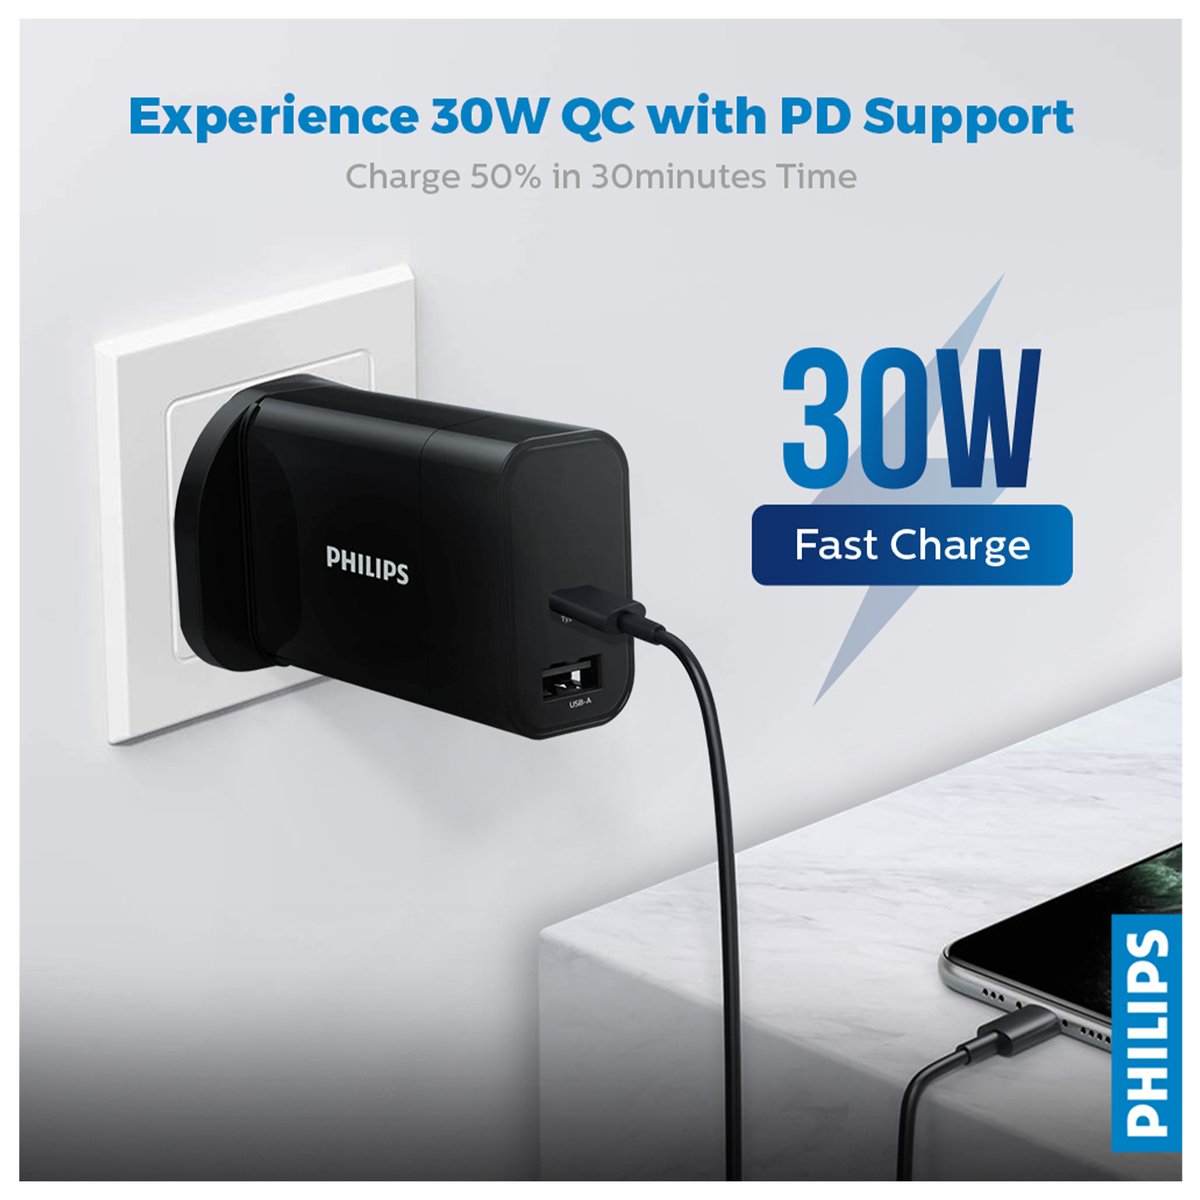 Philips 30W PD+QC Wall Charger, Black -DLP2621/05